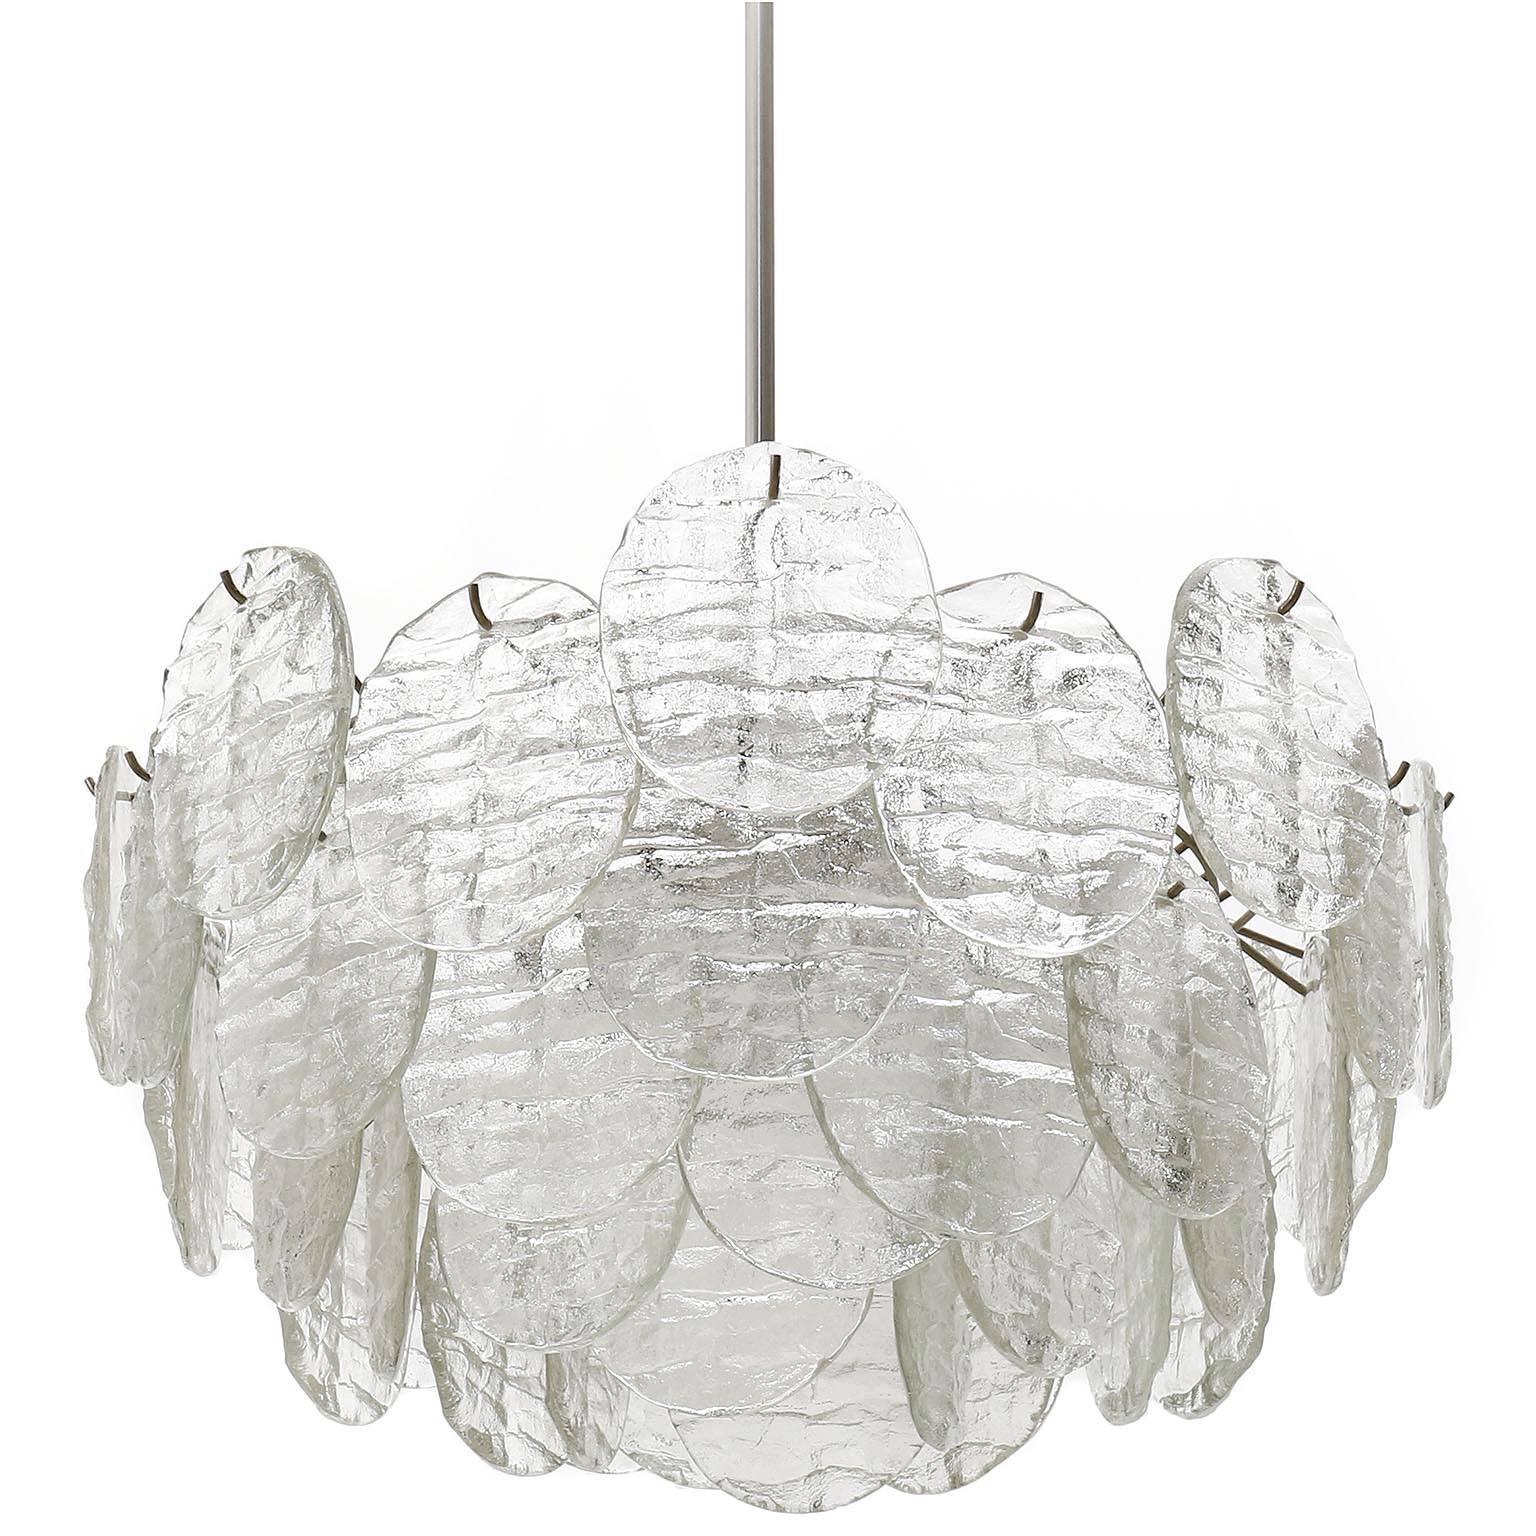 One of three large light fixtures model 'Blatt' (Blatt is the German word for leaf) by J.T. Kalmar, Austria, manufactured in midcentury, circa 1970 (late 1960s or early 1970s).
44 disc shaped clear glasses in the form of leaves hang on a